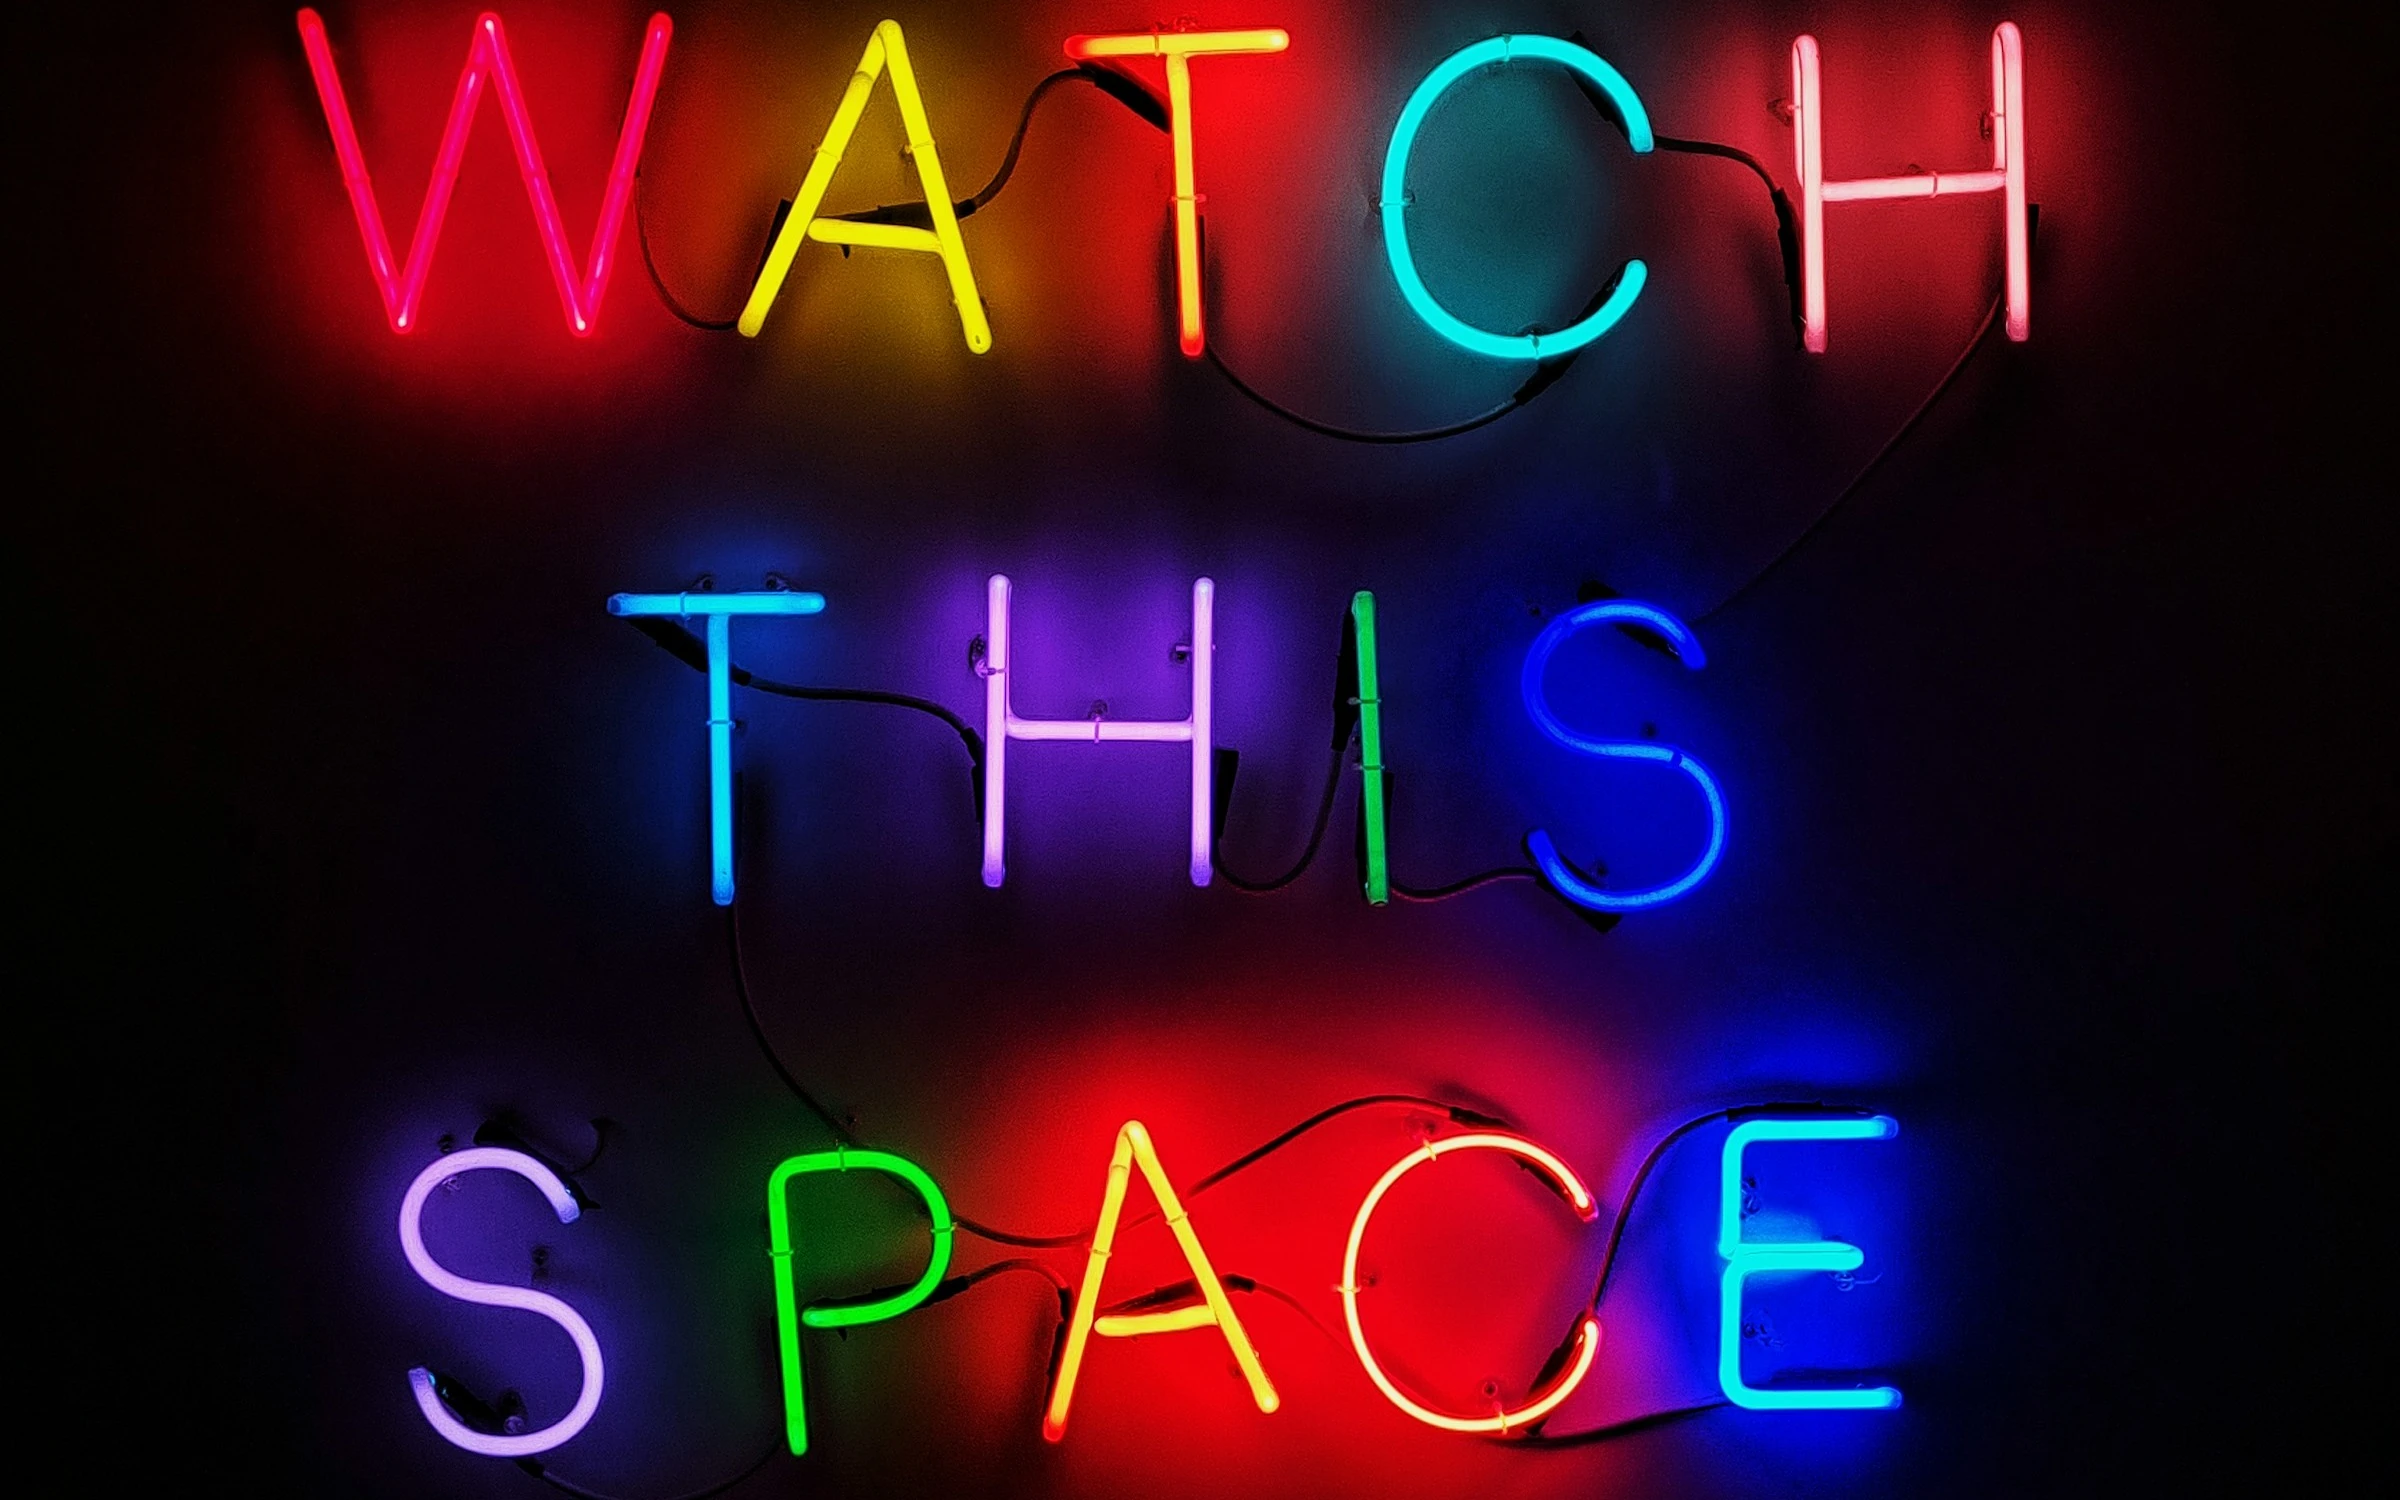 A glowing neon sign that says "Watch This Space", with each letter coloured differently.